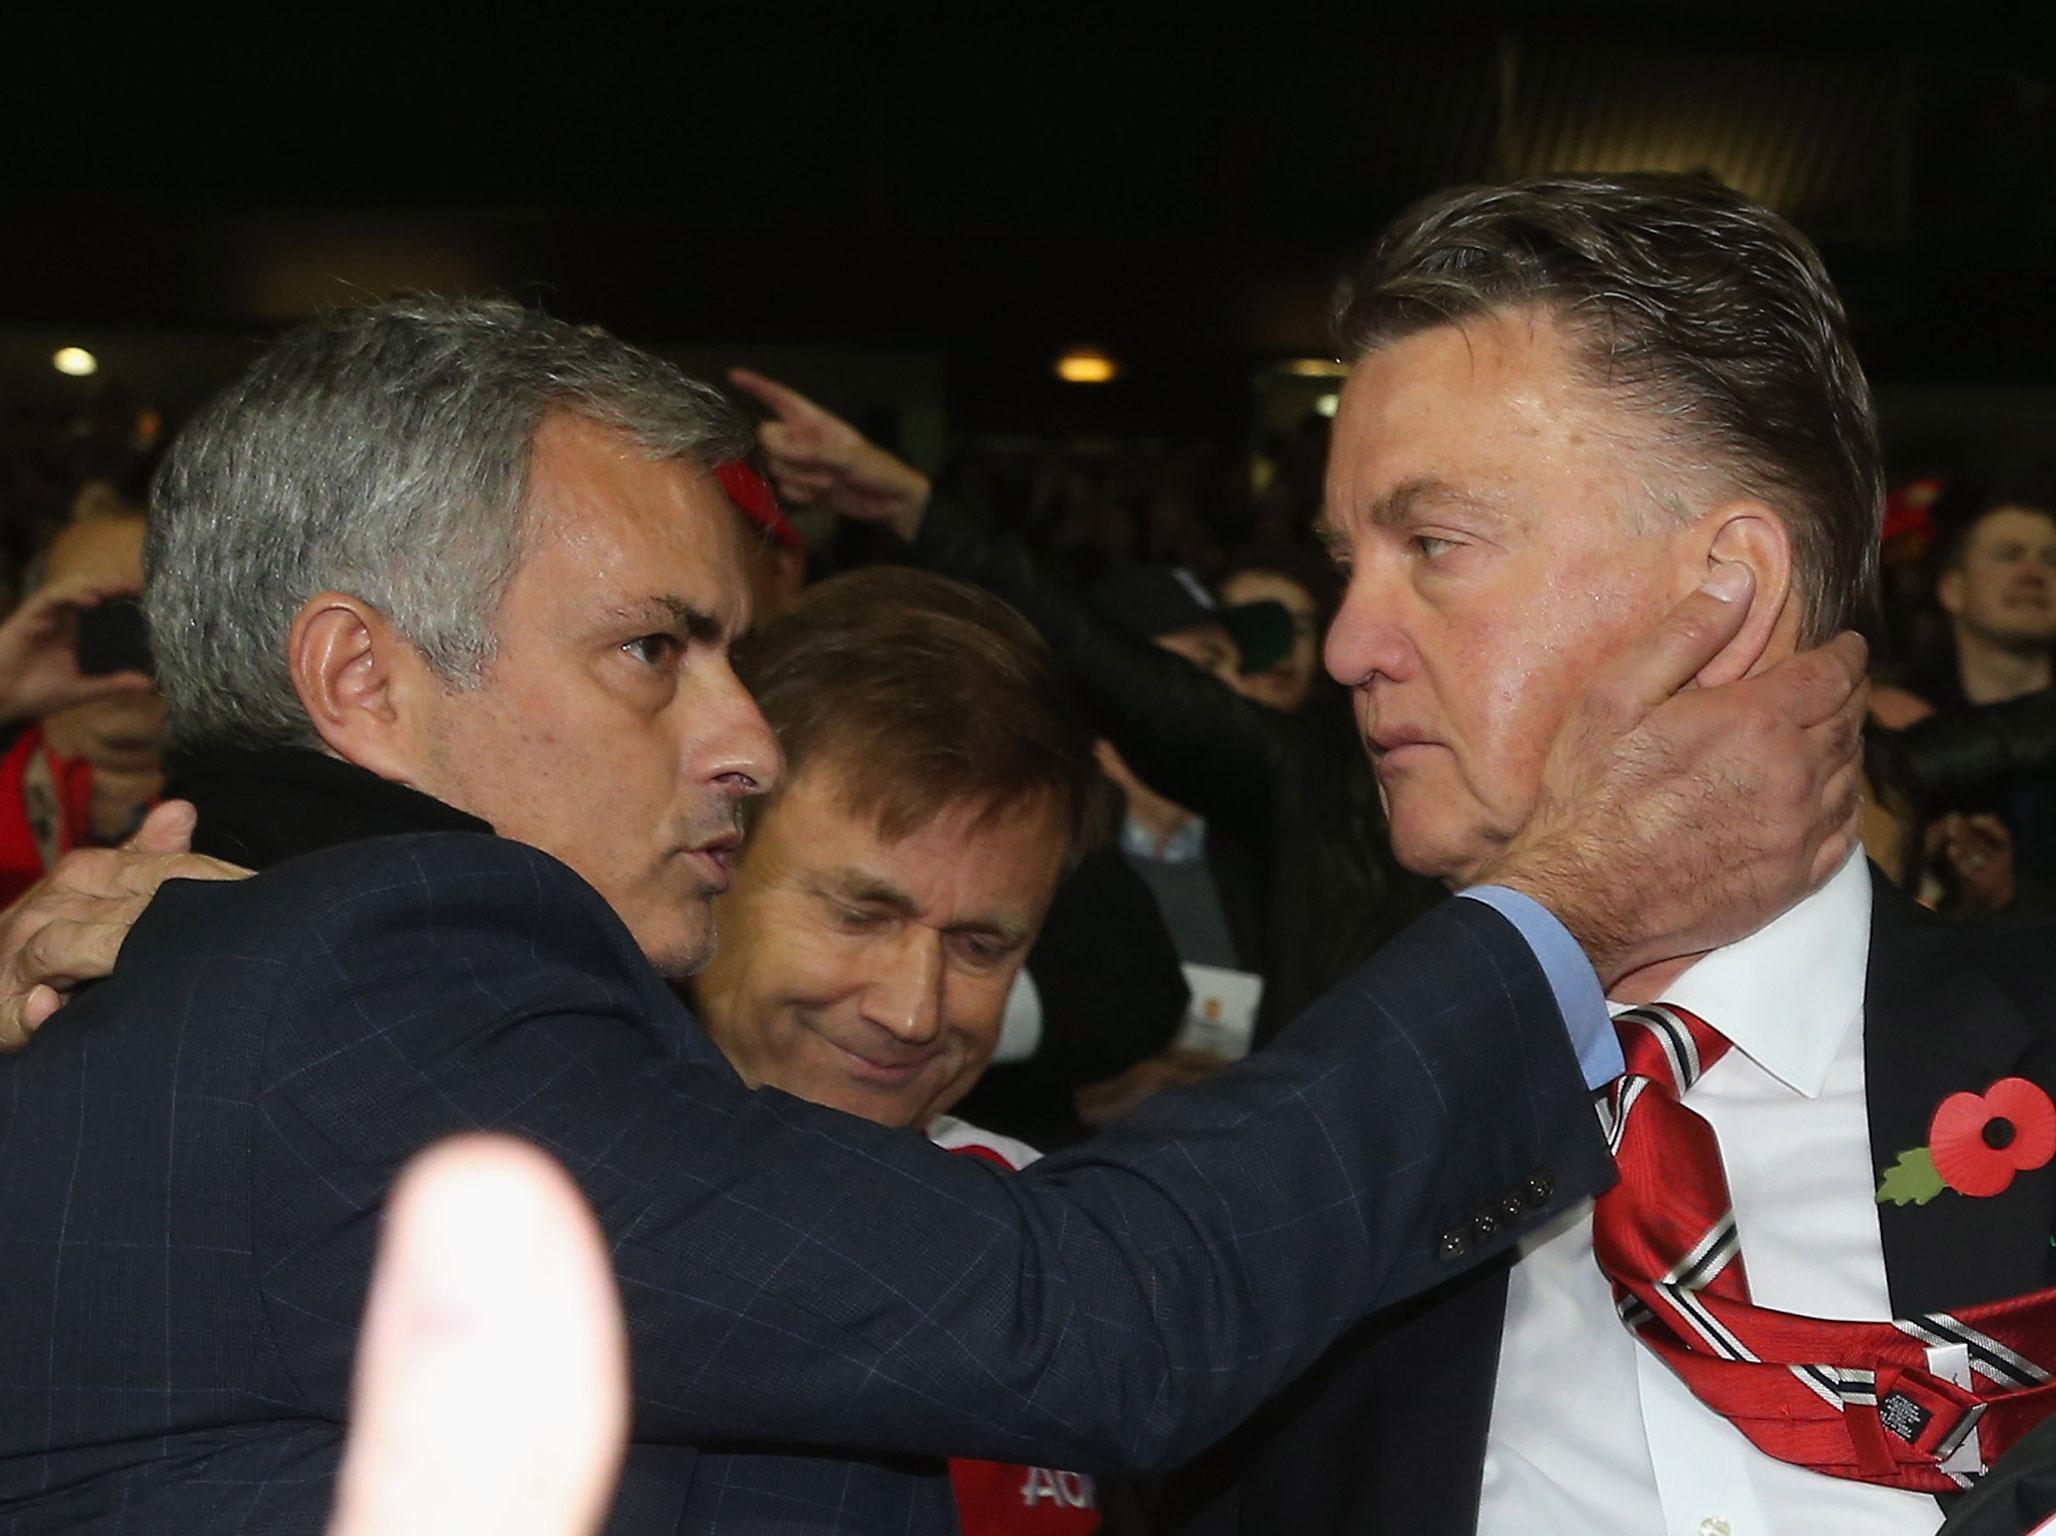 Jose Mourinho believes Louis van Gaal presided over an 'empty period' at Manchester United